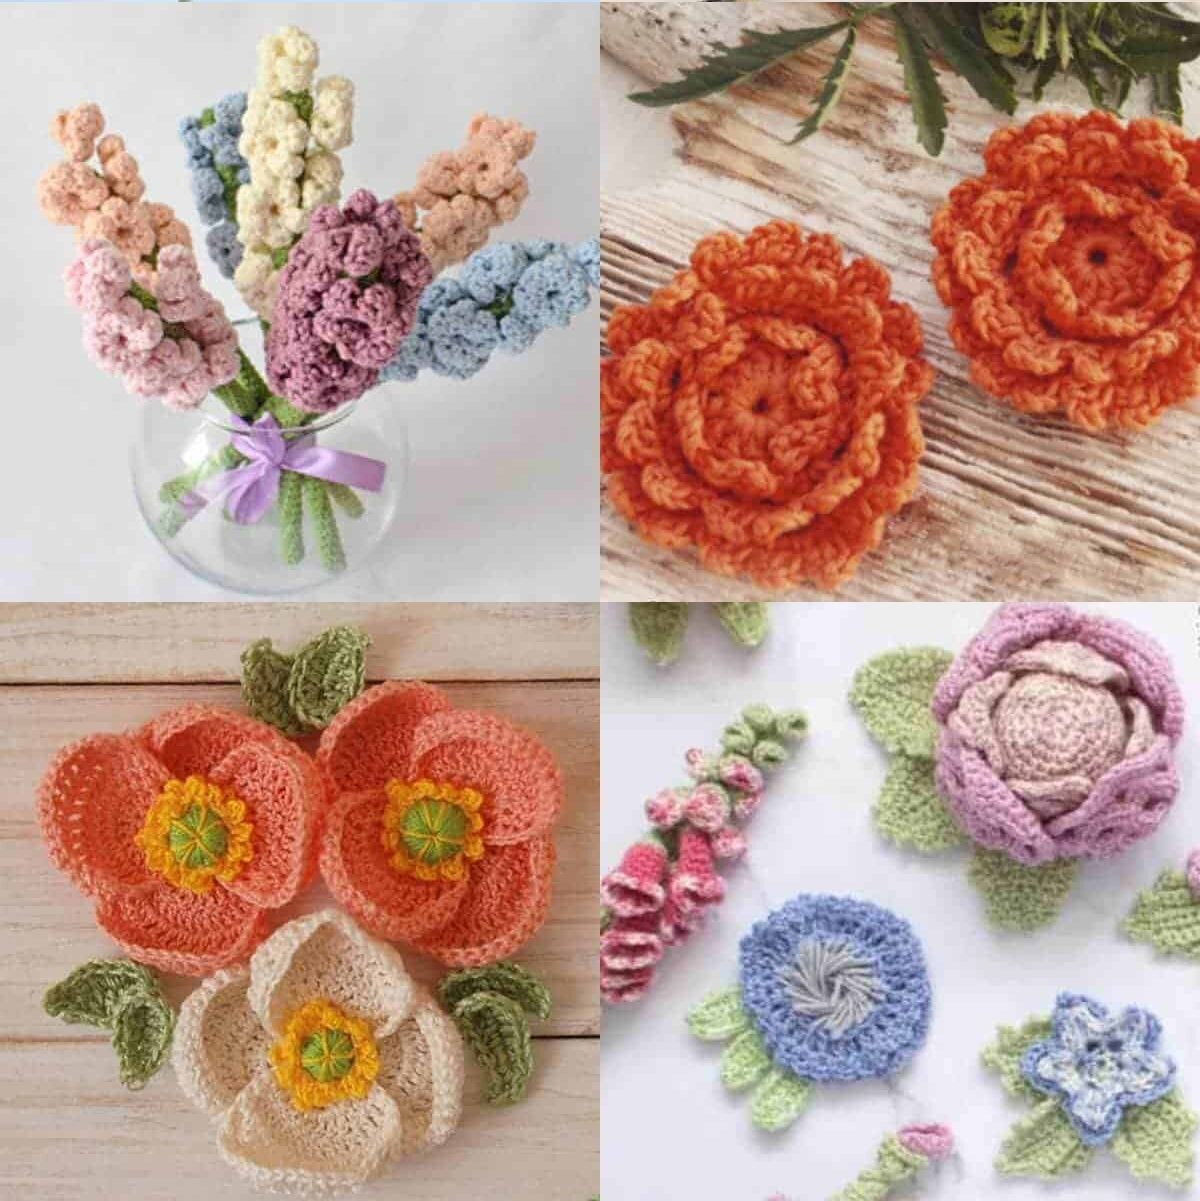 Ravelry: The Book of Crochet Flowers 2 - patterns